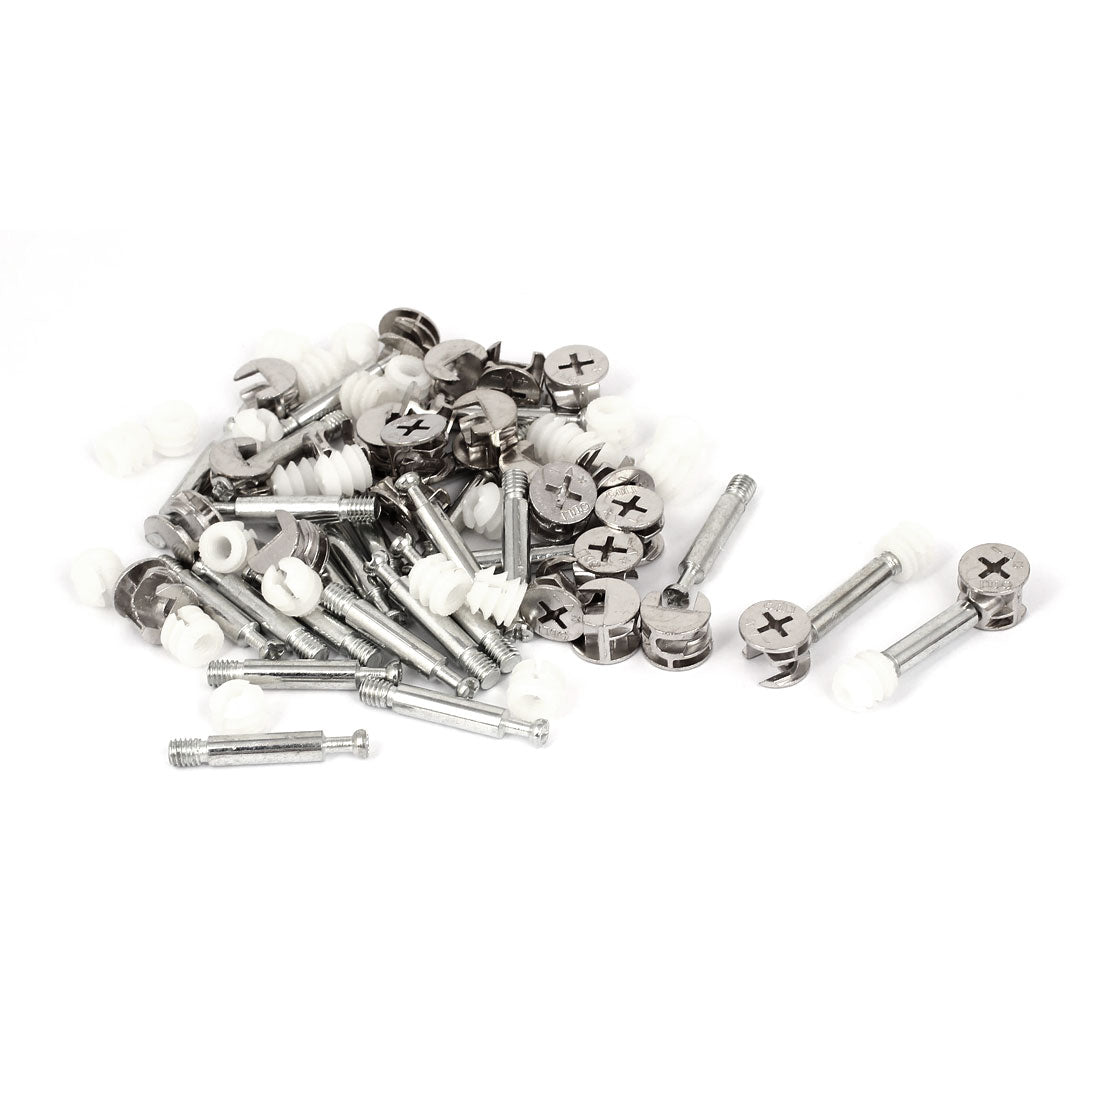 uxcell Uxcell Furniture Hardware 15mmx11mm Connection Screws Eccentric Nuts 25 Set